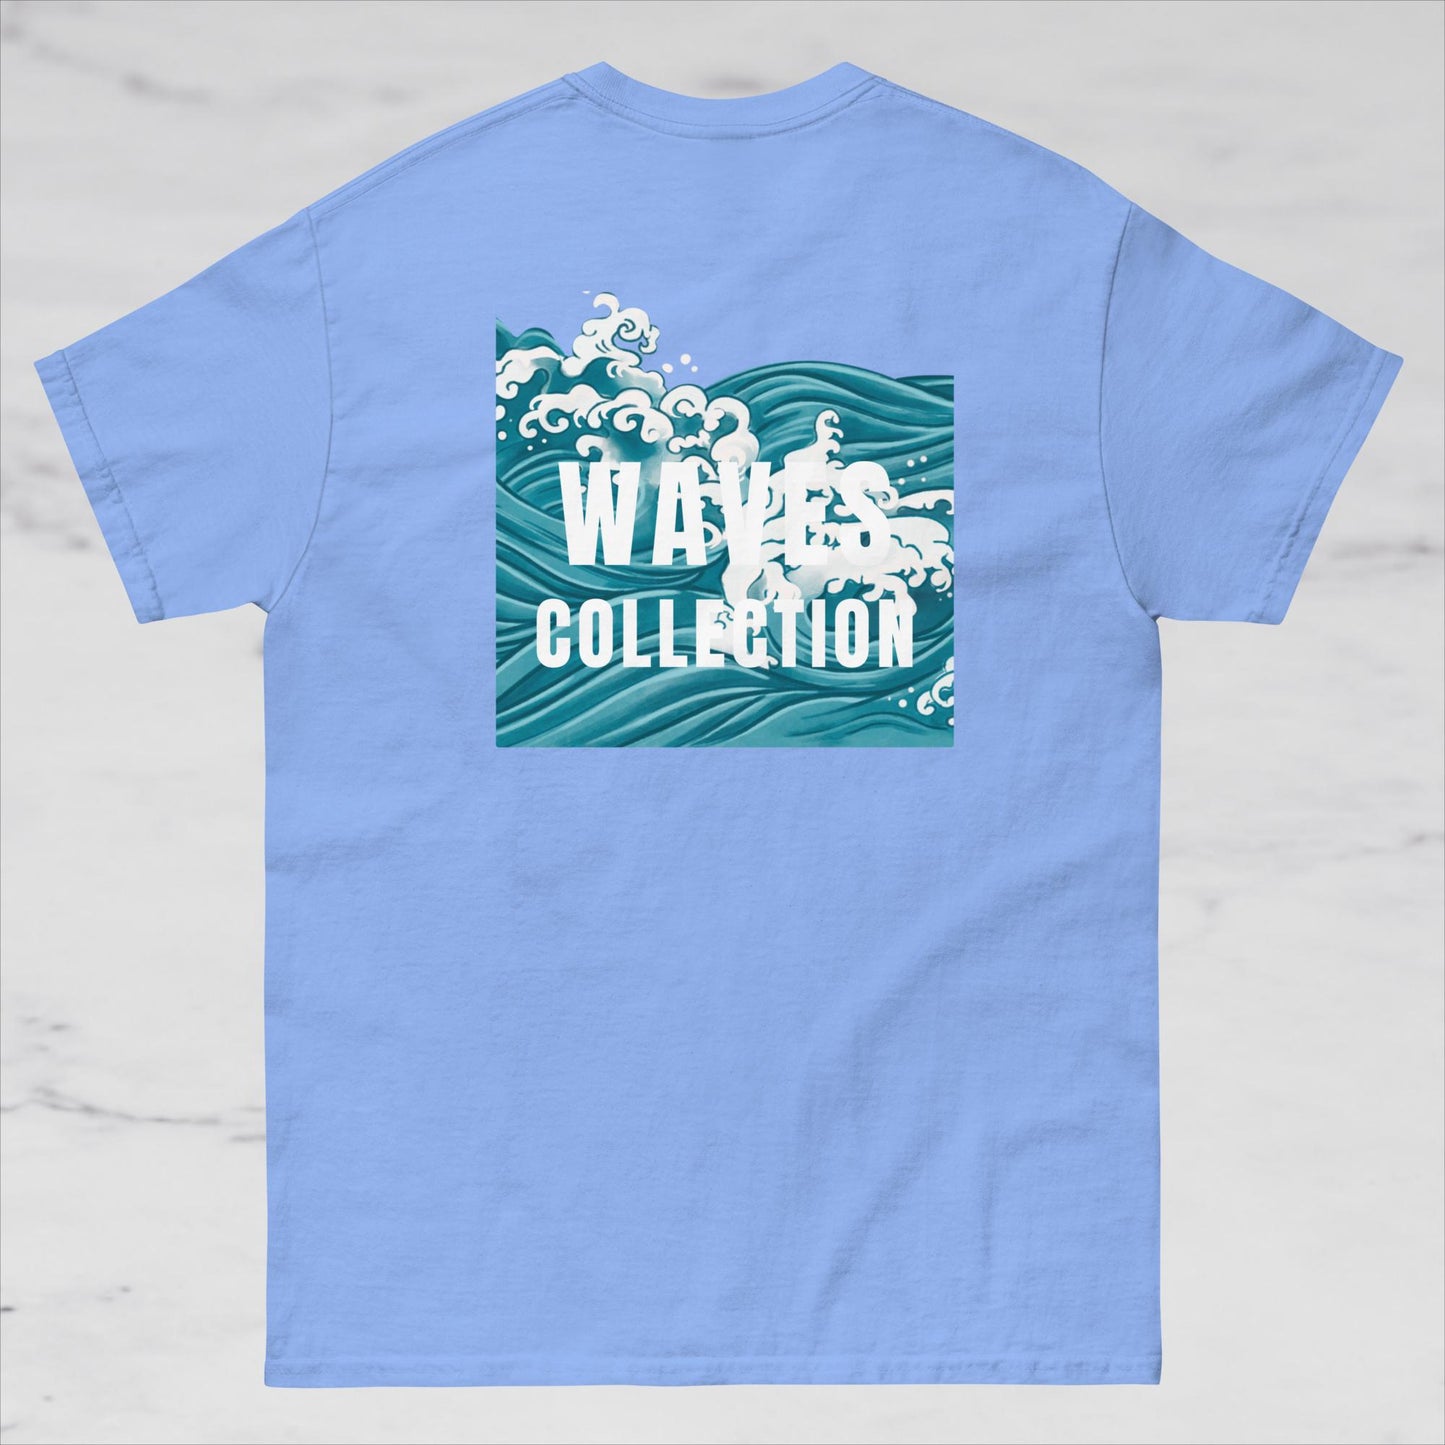 Washed WC Tee